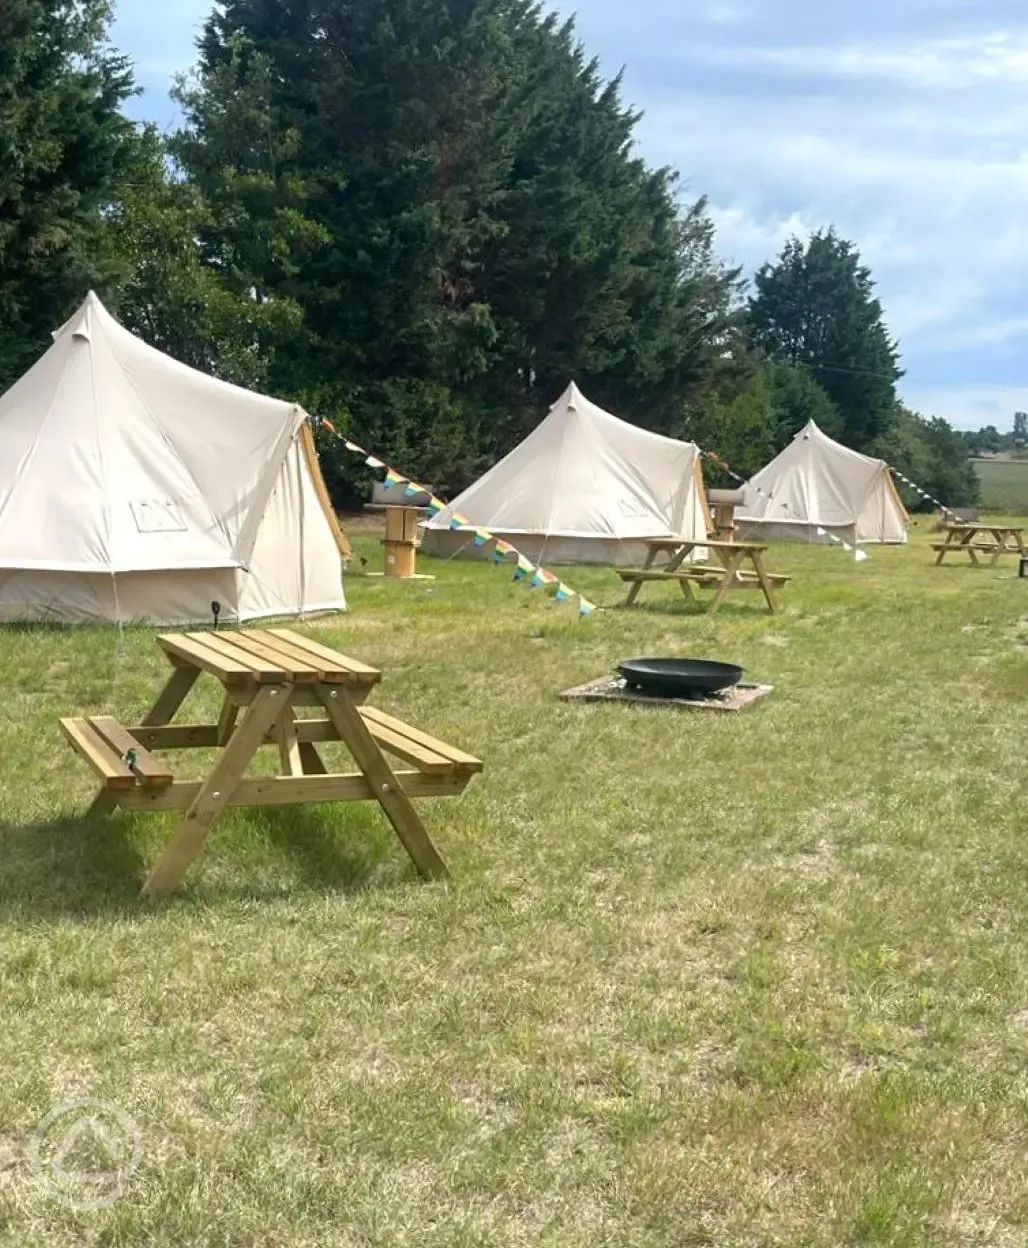 Bell tents with fire pits and picnic benches